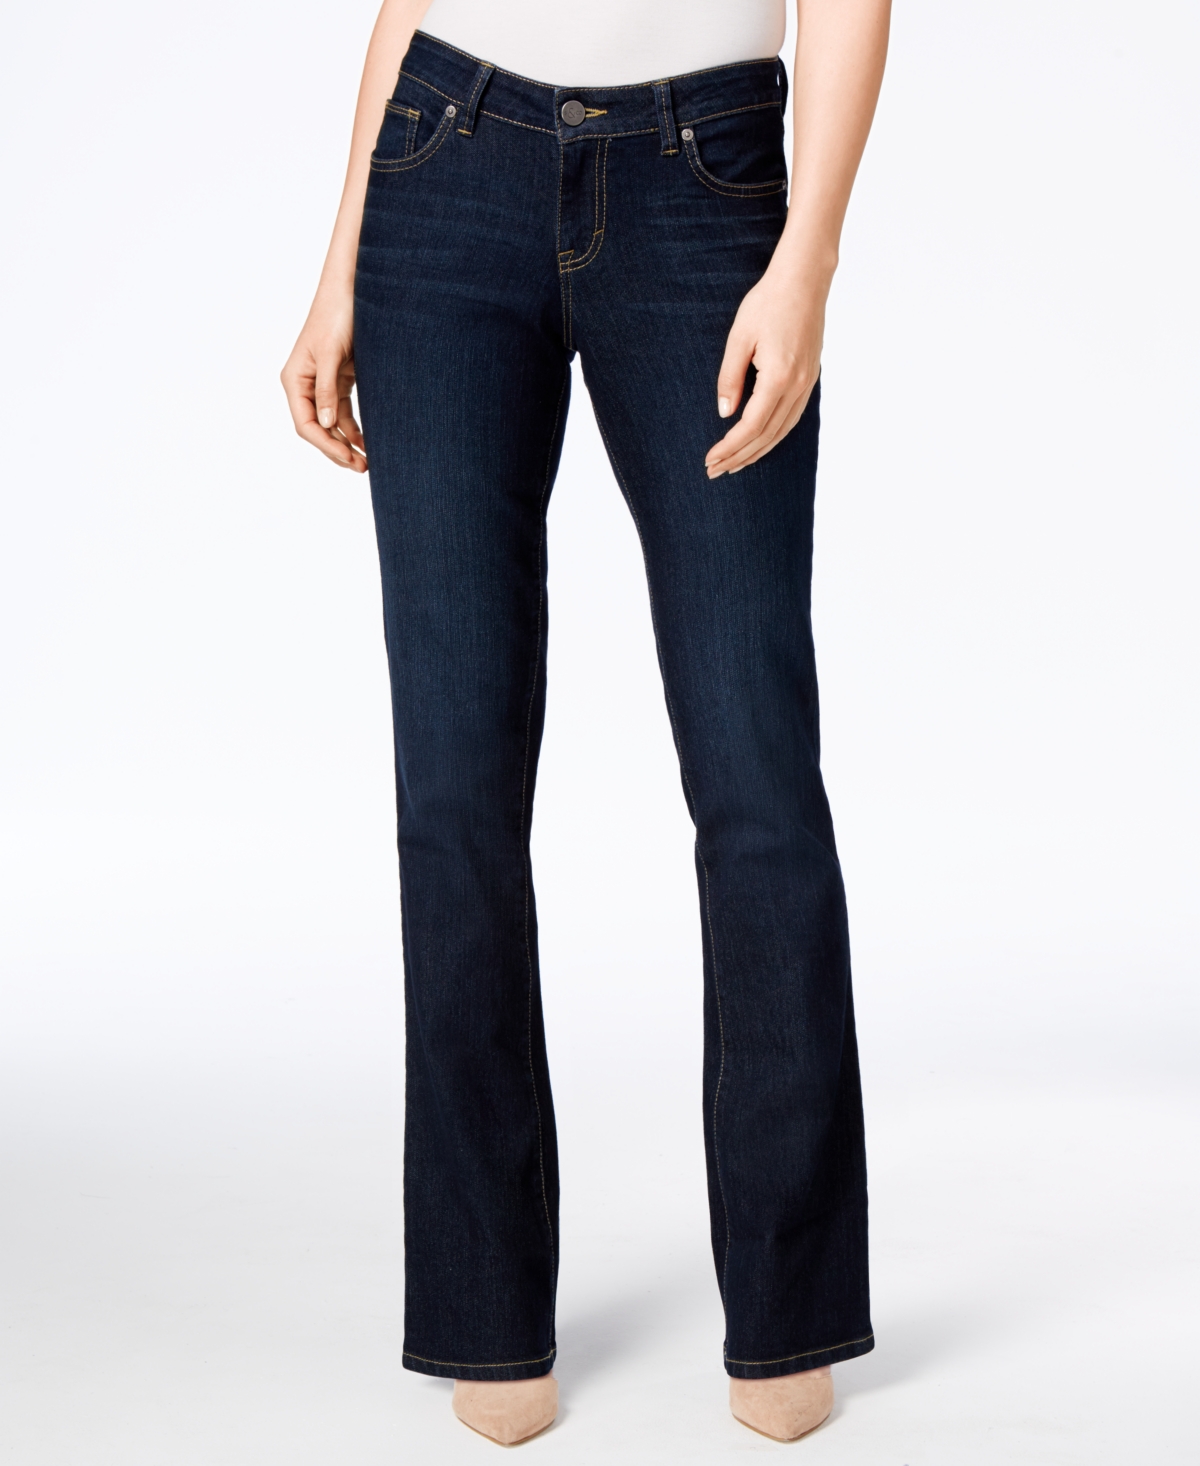 Style & Co Women's Low Rise Curvy-Fit Bootcut Jeans